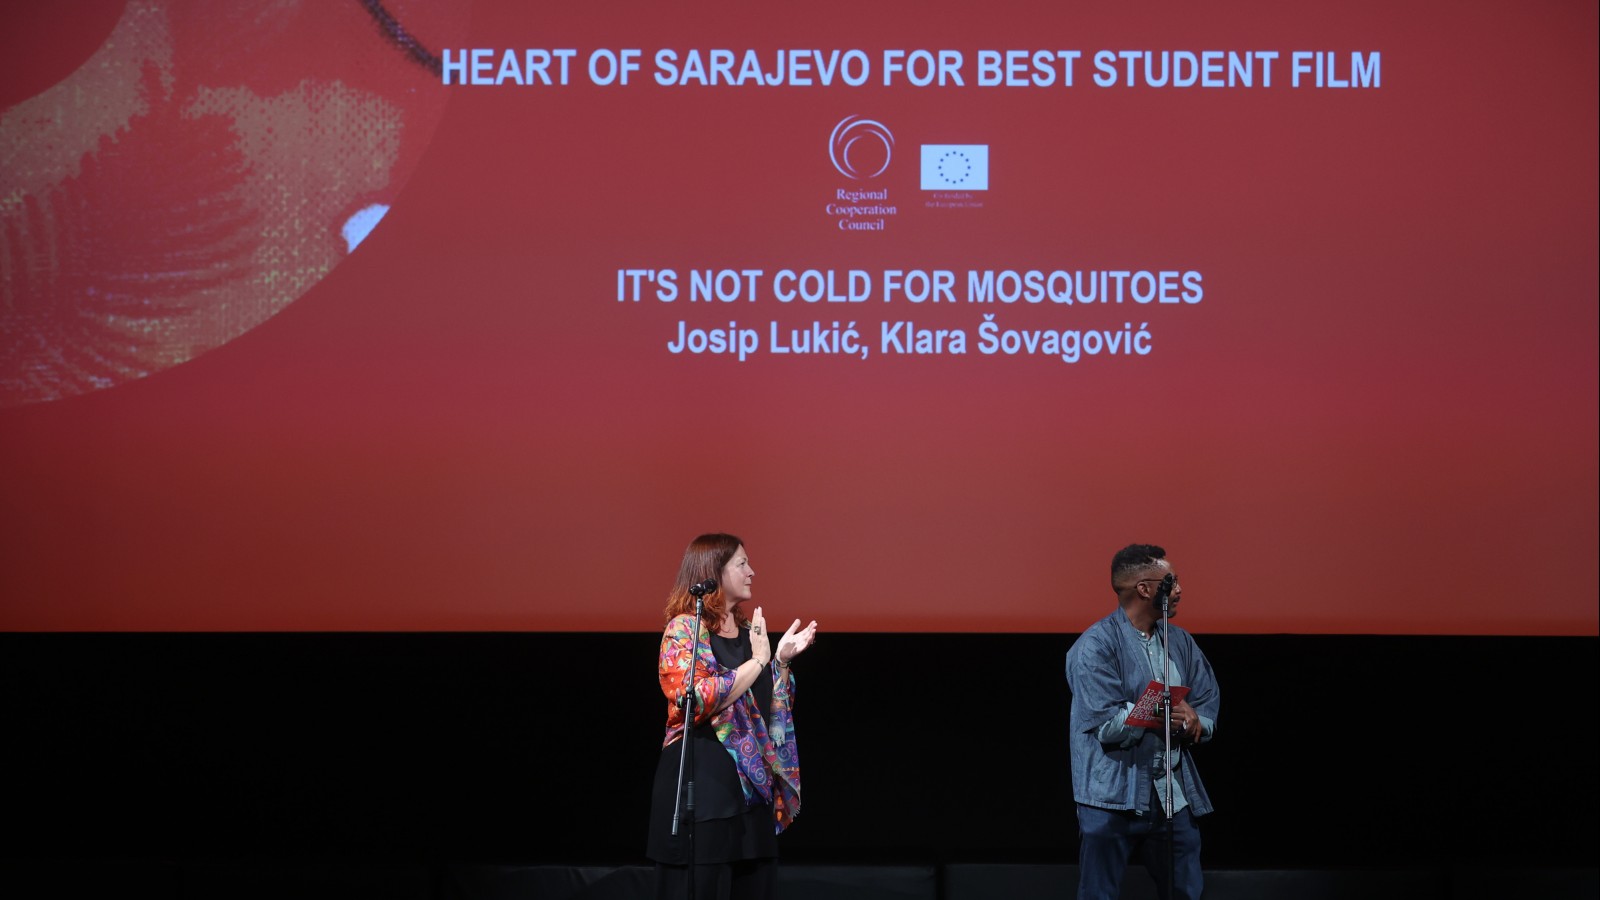 Closing ceremony of the 28th Sarajevo Film Festival, held on 19 August 2022